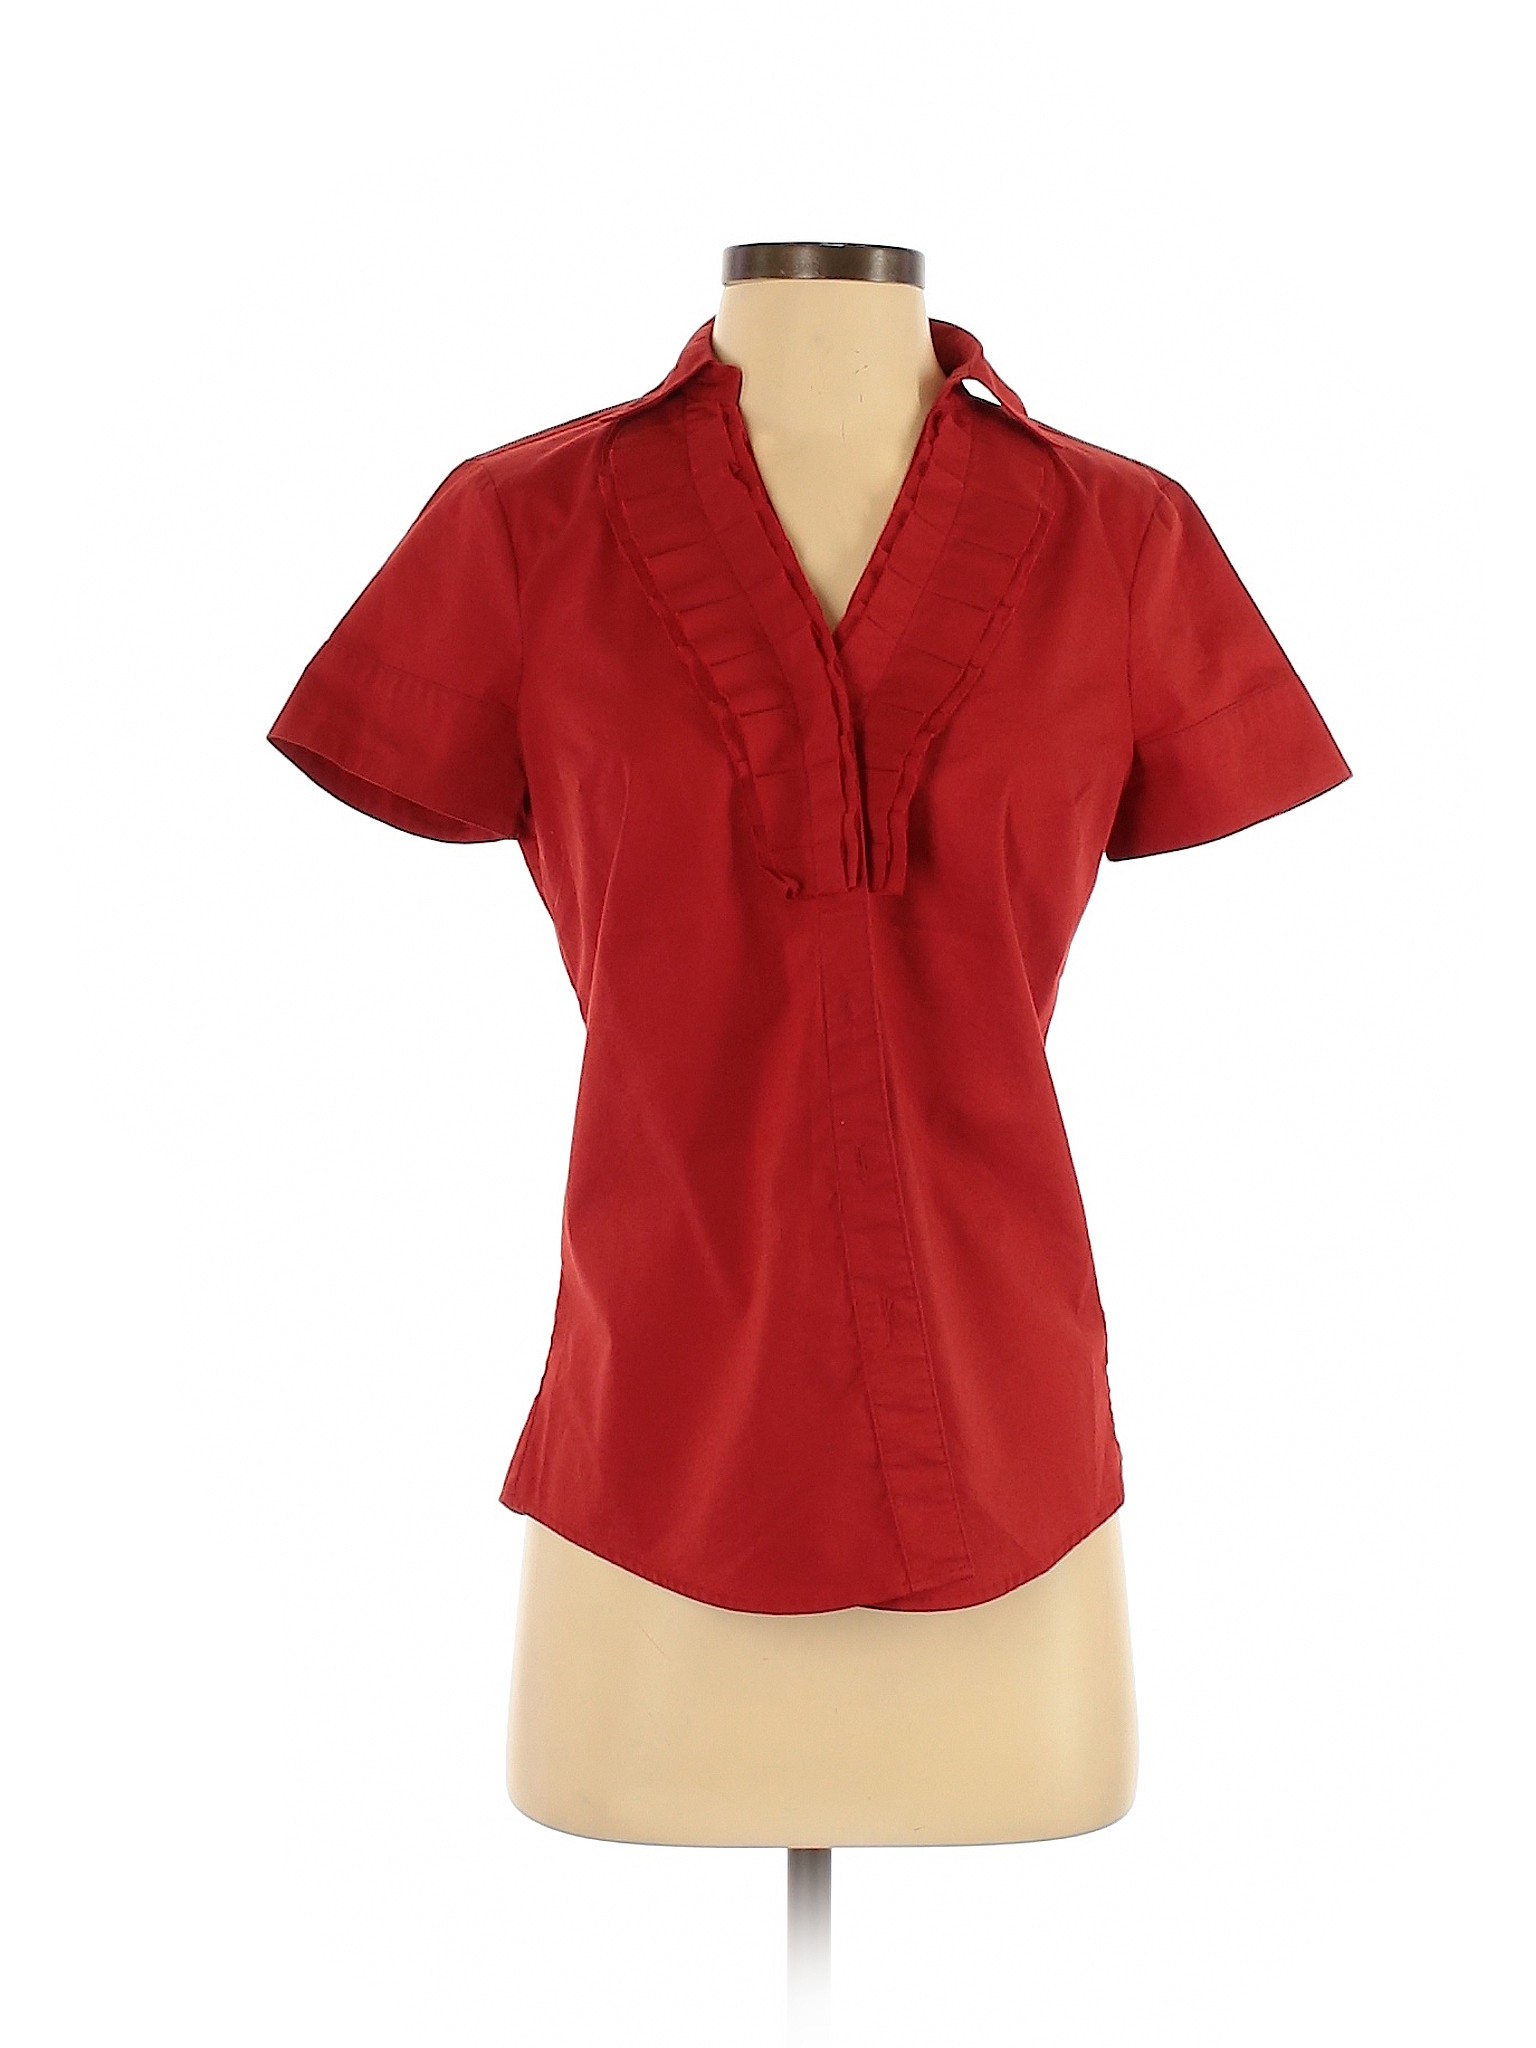 red button up shirts for women